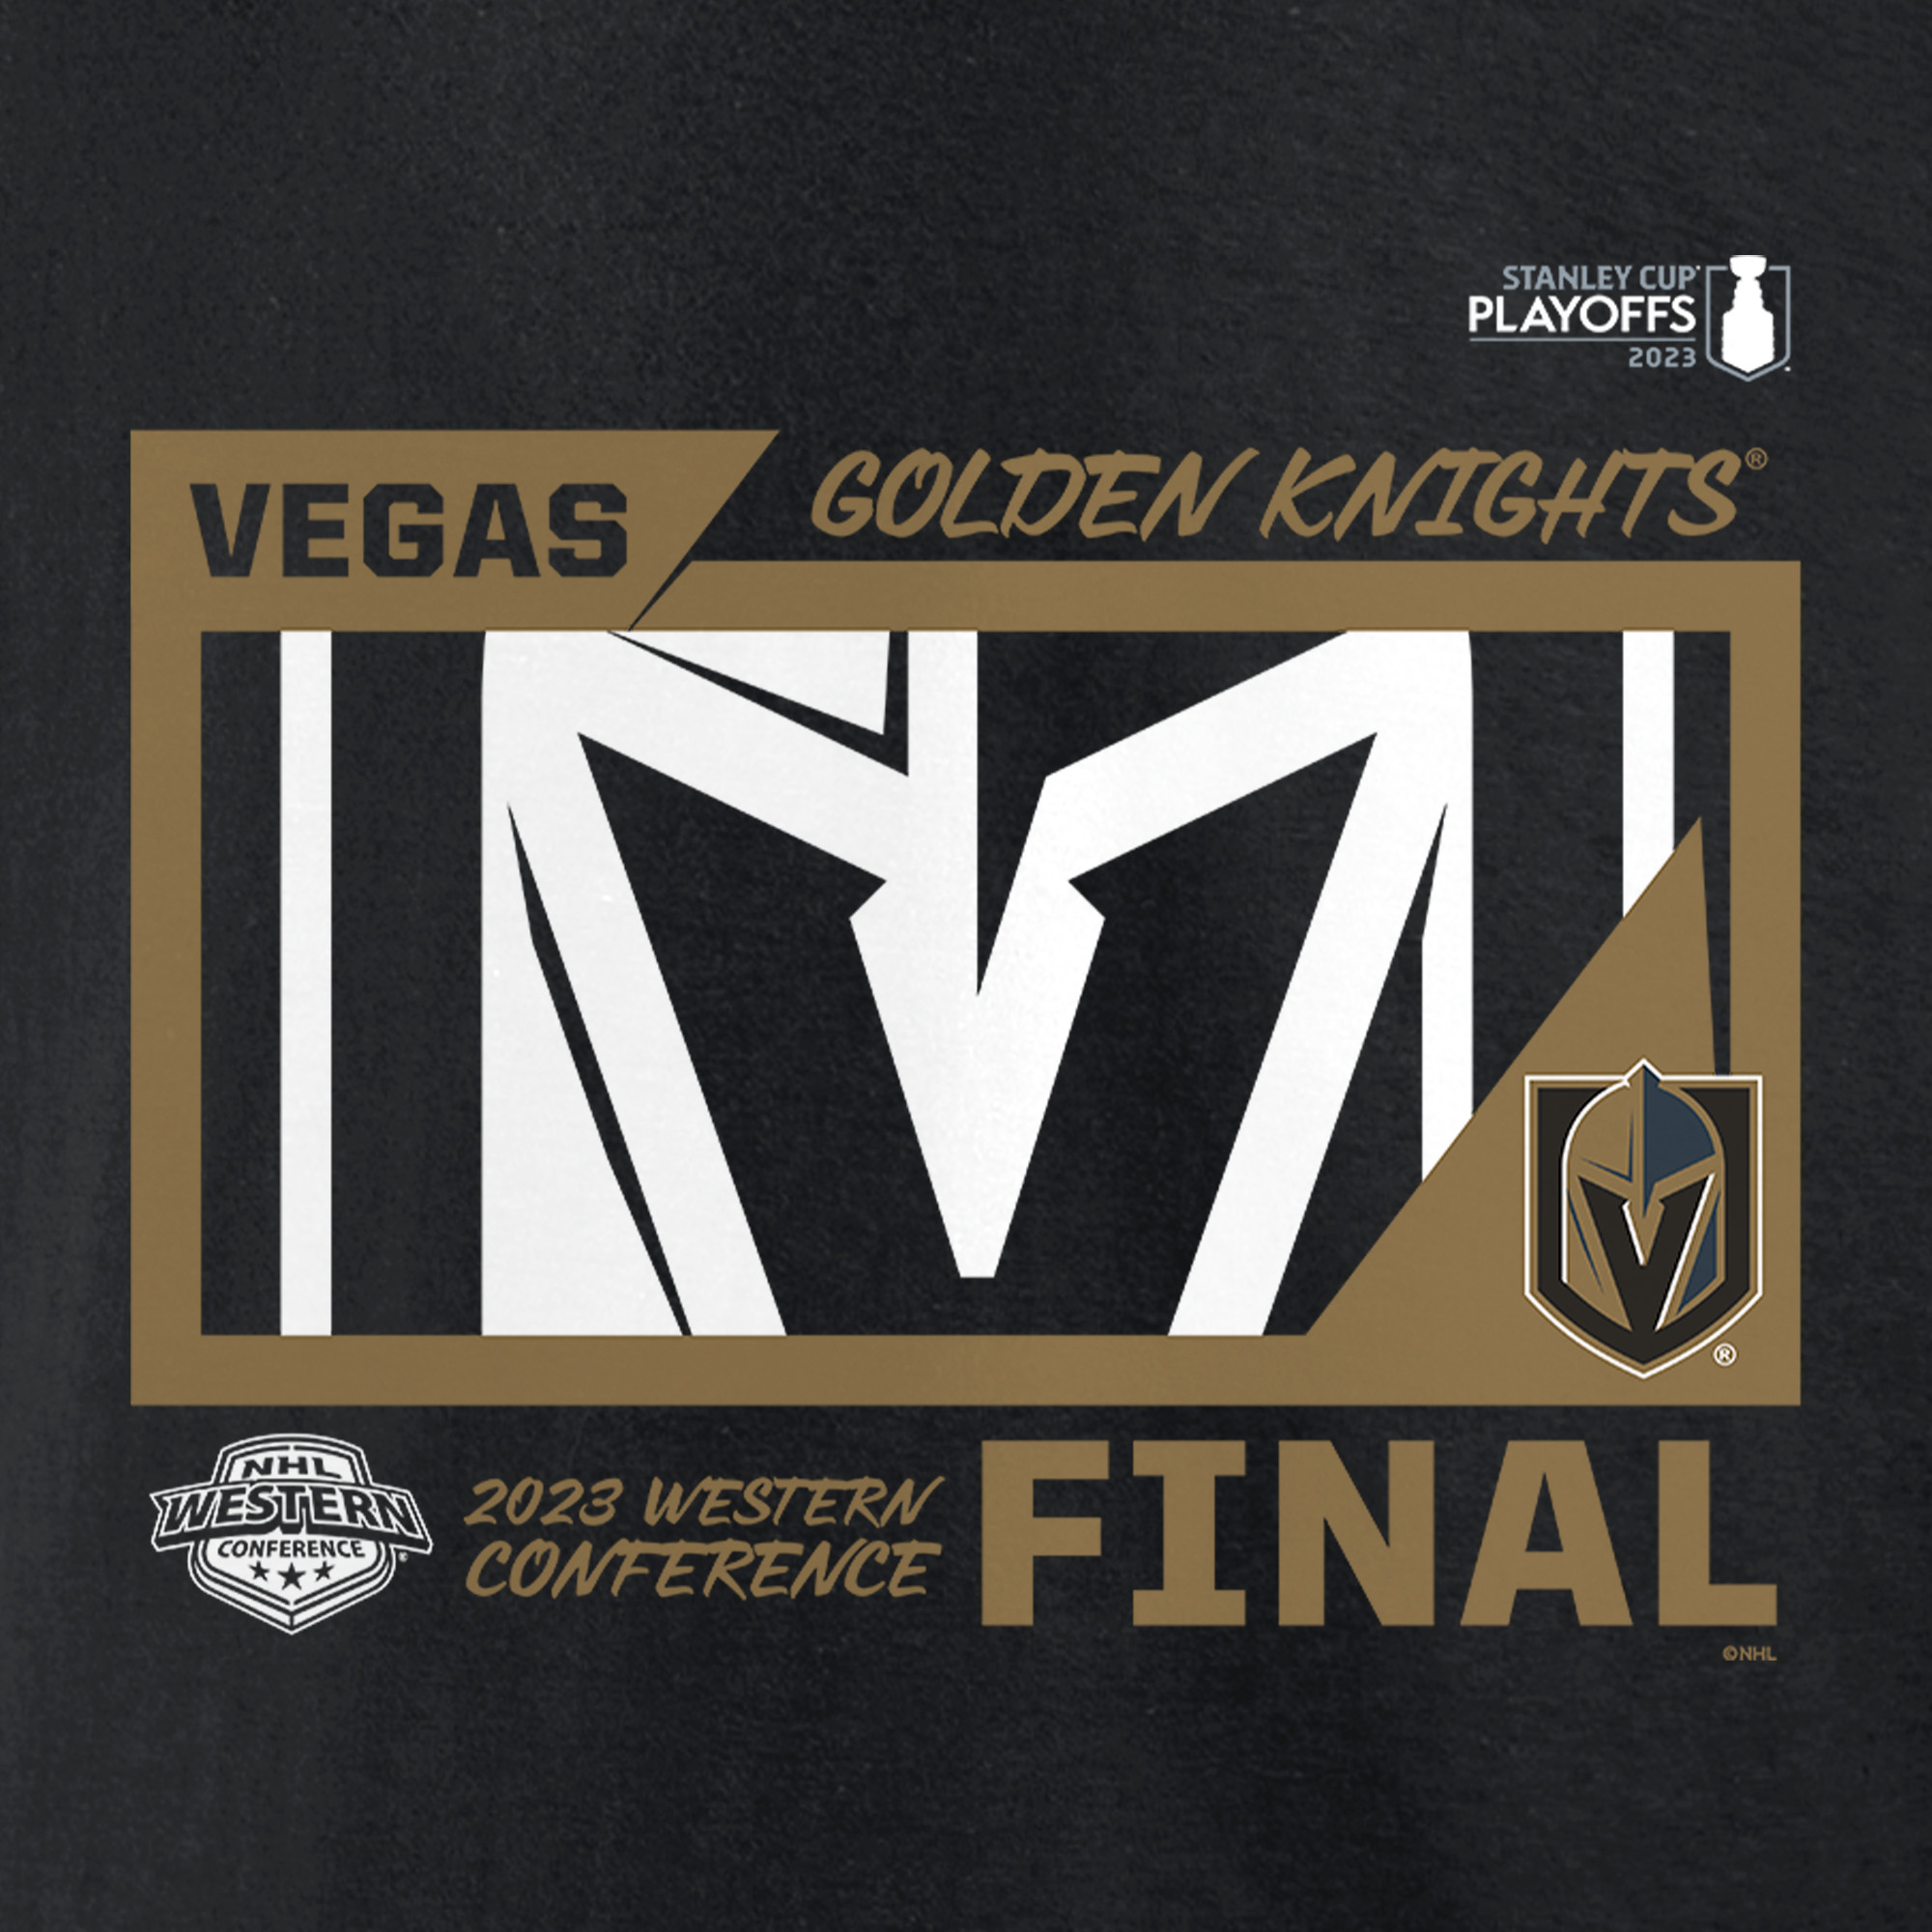 Men's Fanatics Branded  Black Vegas Golden Knights 2023 Stanley Cup Playoffs Western Conference Final T-Shirt - image 4 of 4